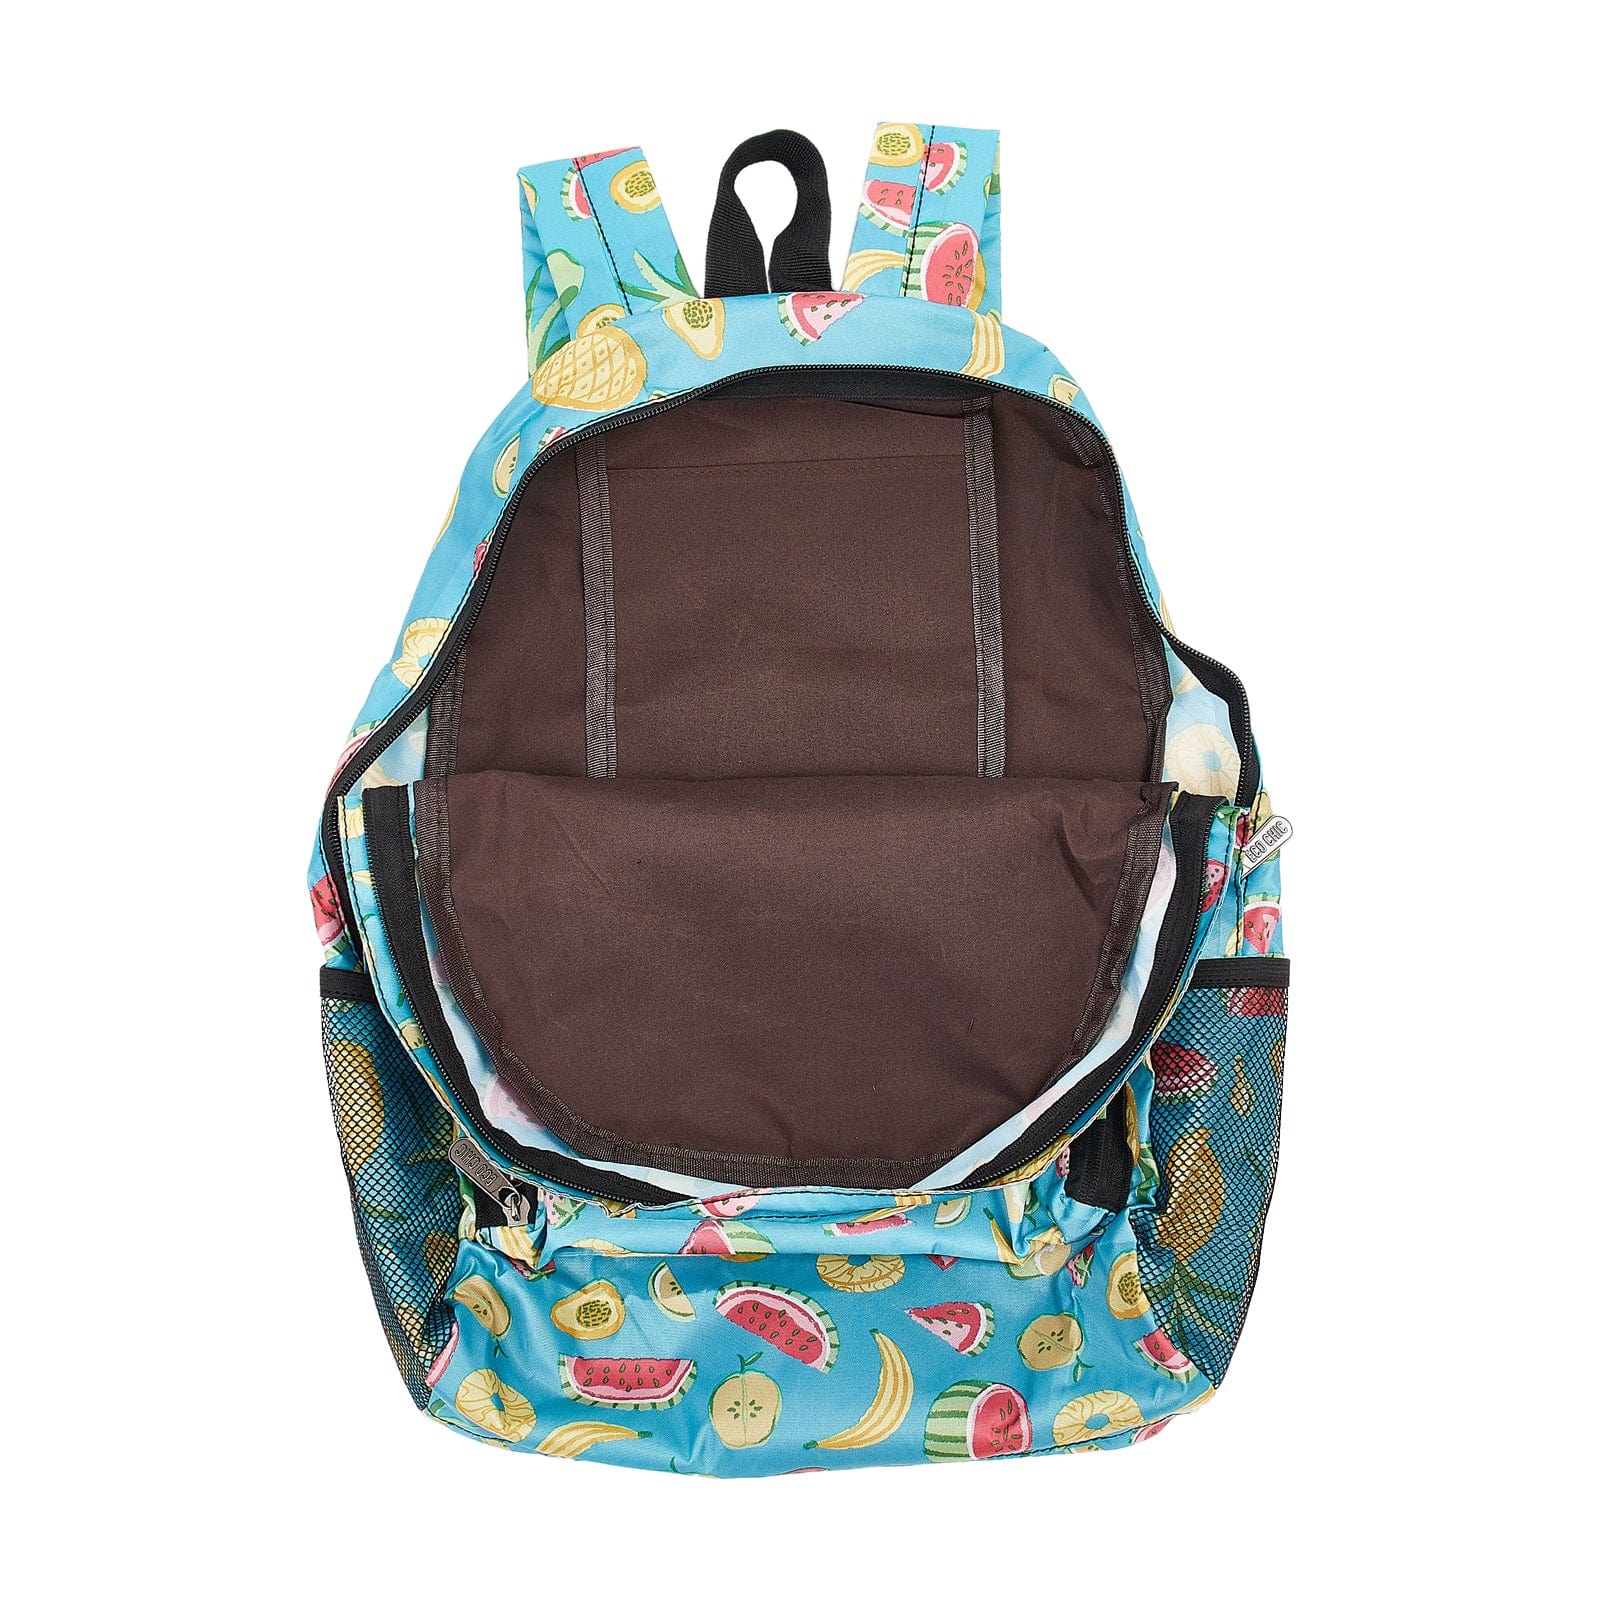 Eco Chic Blue Eco Chic Lightweight Foldable Backpack Mixed Fruits